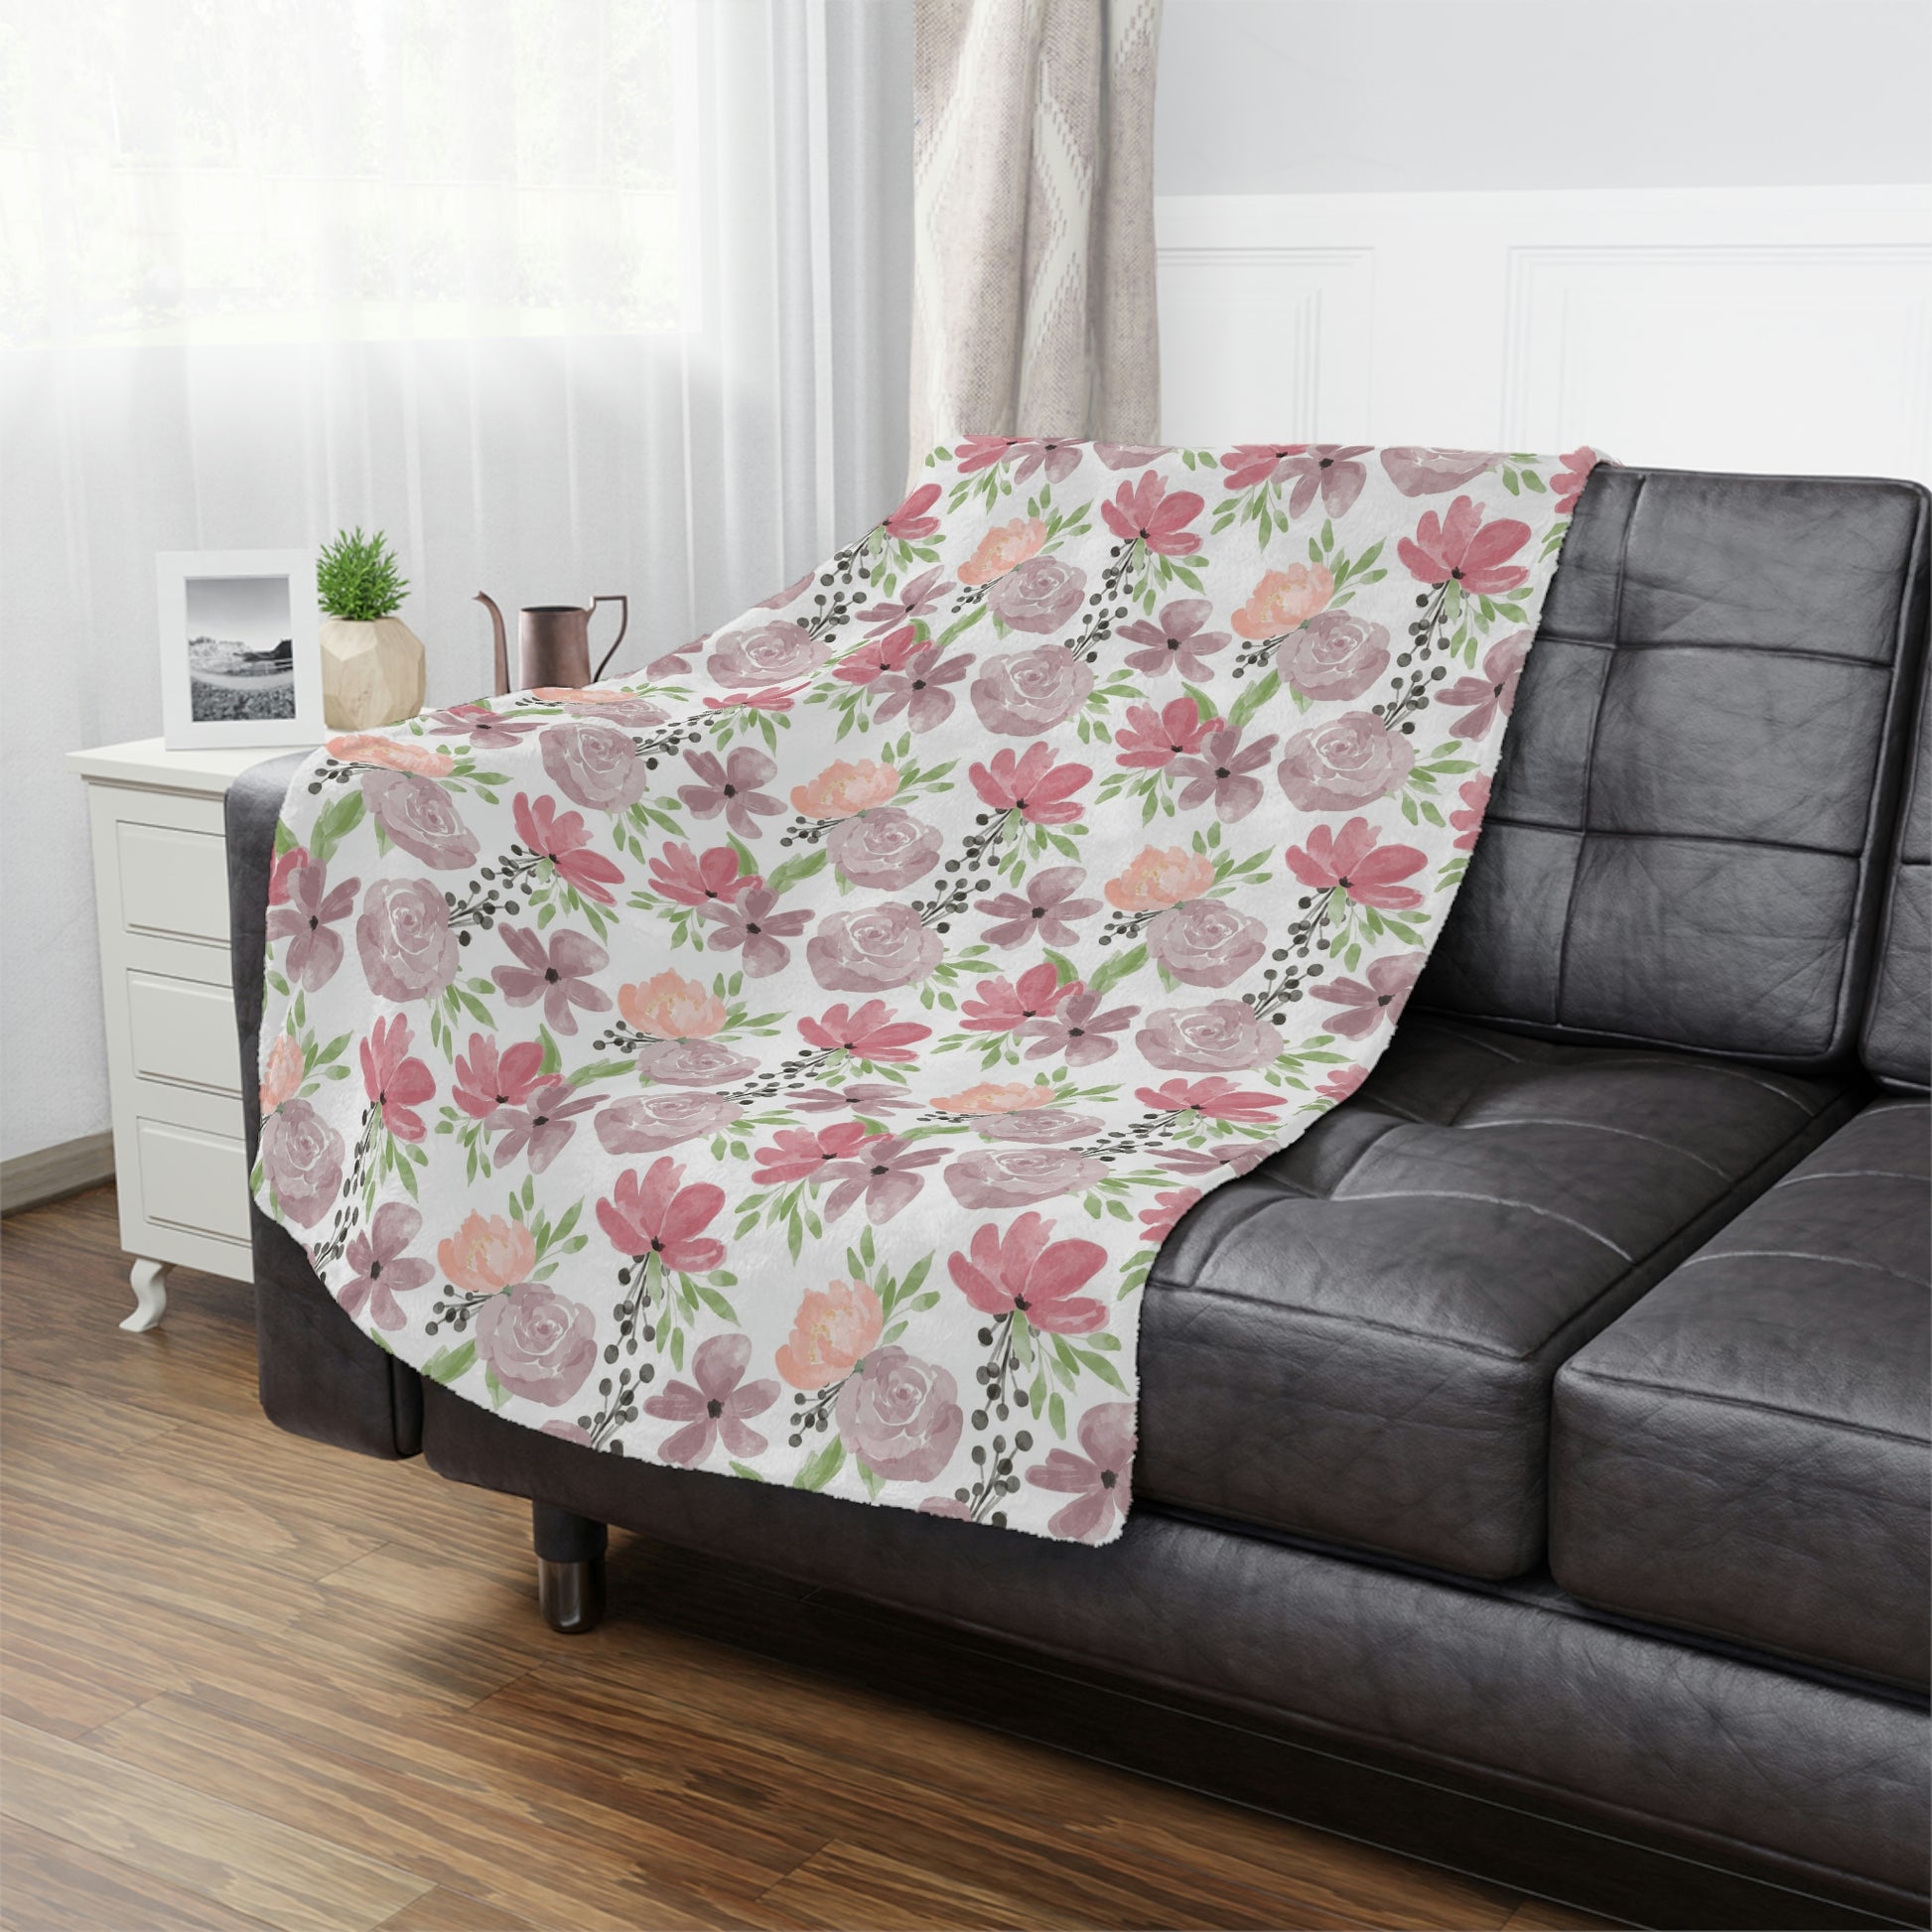 pink and purple floral blanket on a couch, pink flower pattern on a blanket, purple floral throw blanket lying on a bed